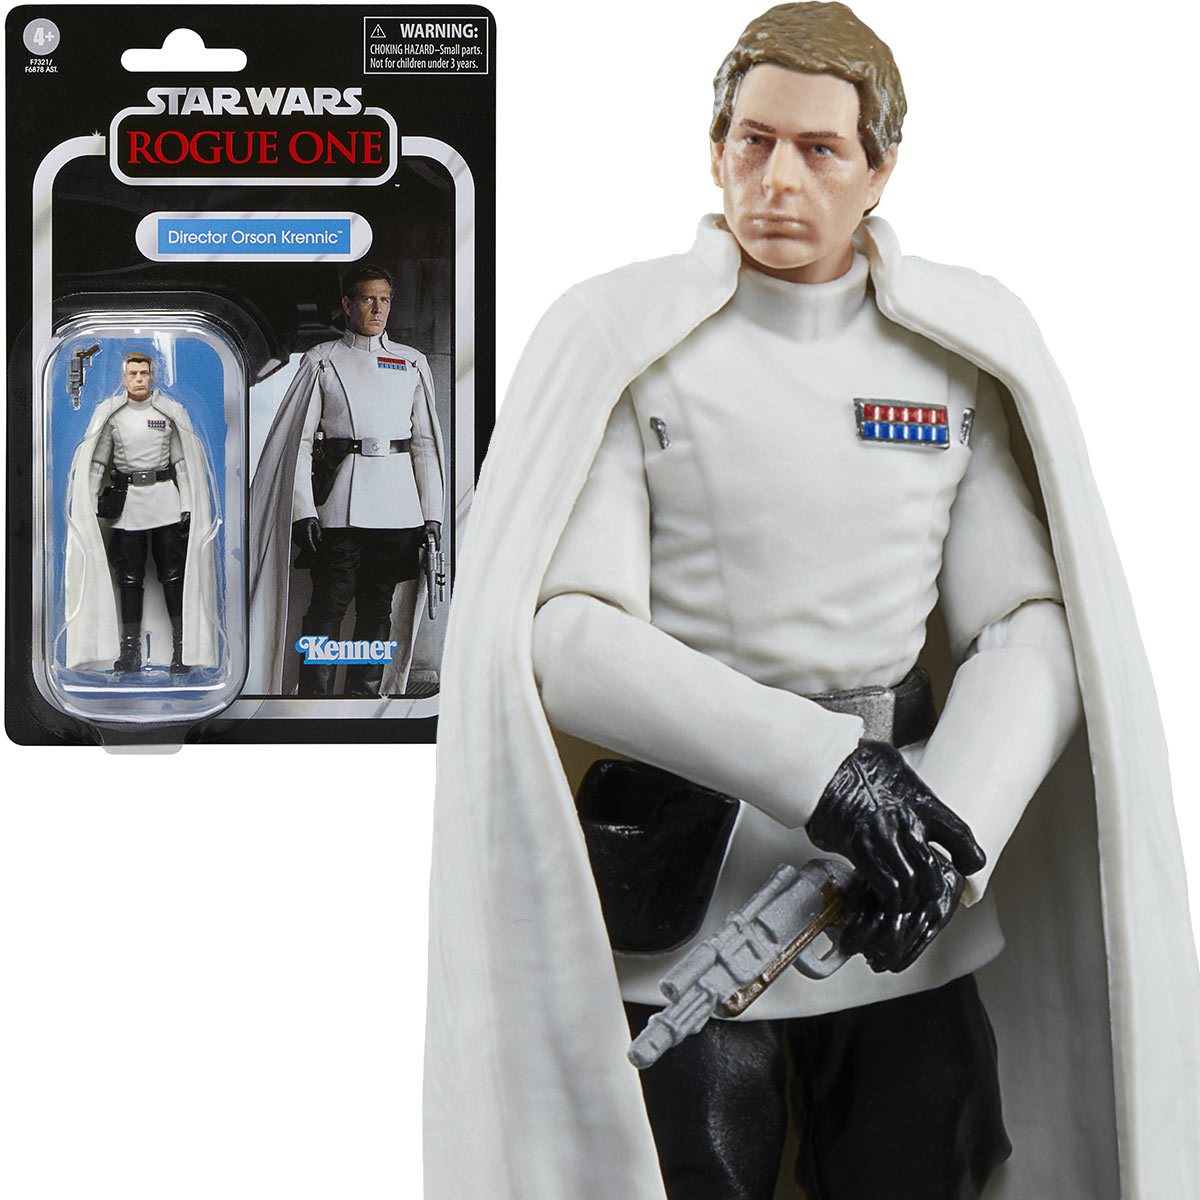 Star Wars The Vintage Collection Director Orson Krennic 3 34-Inch Action Figure HASF7321 5010996124357